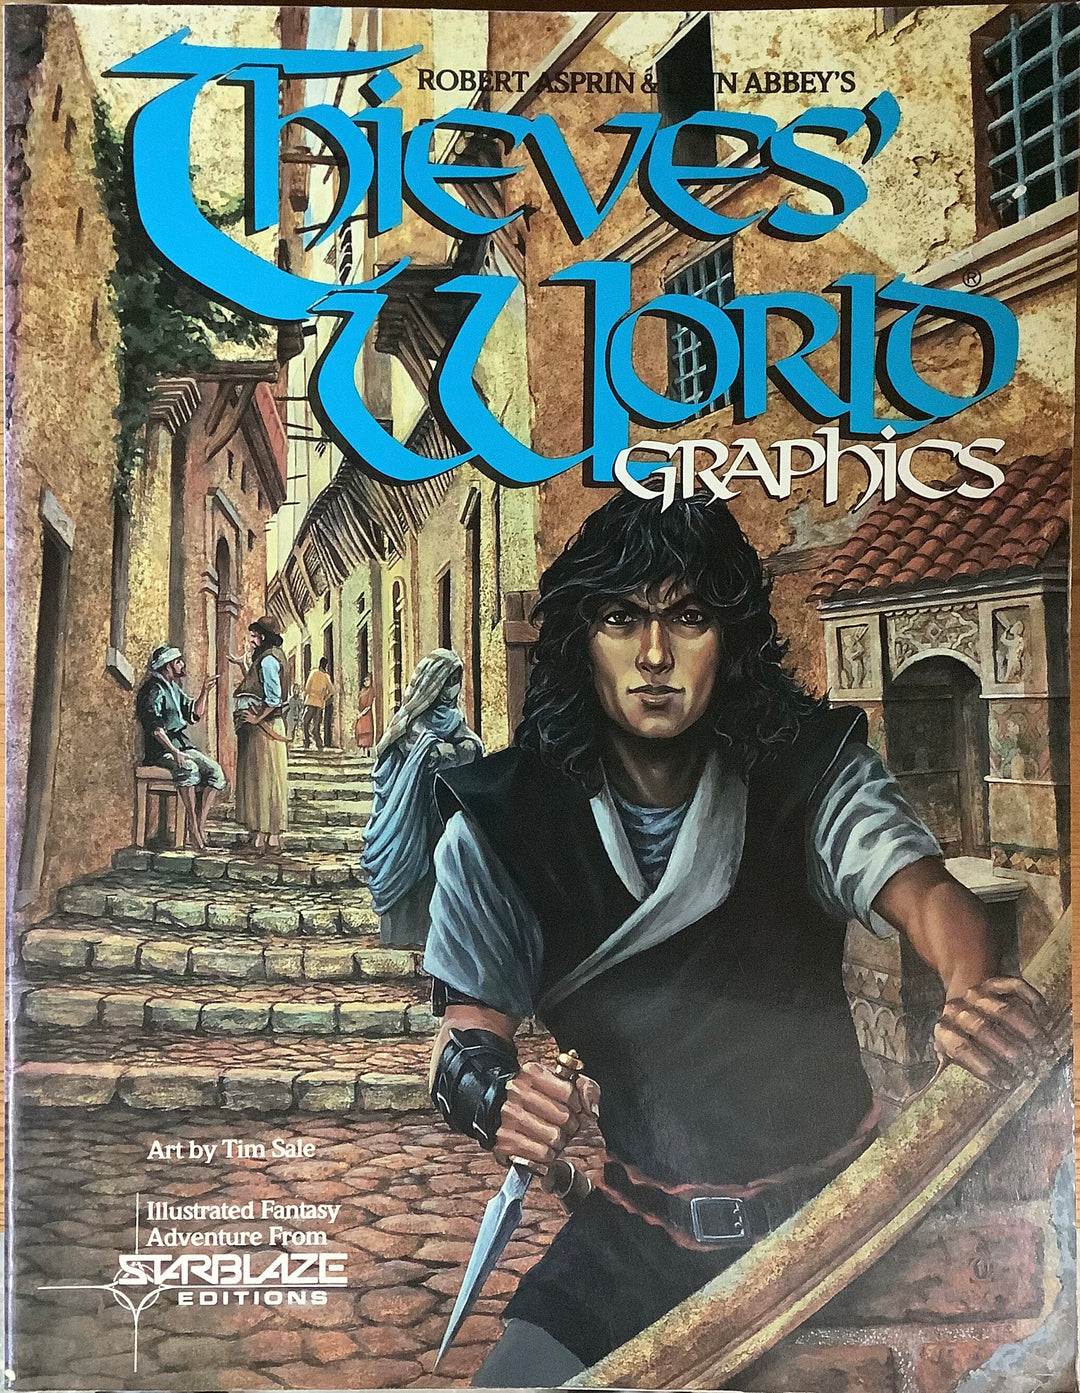 Thieves' World Graphics Vol #1 Graphic Novel OXS-12